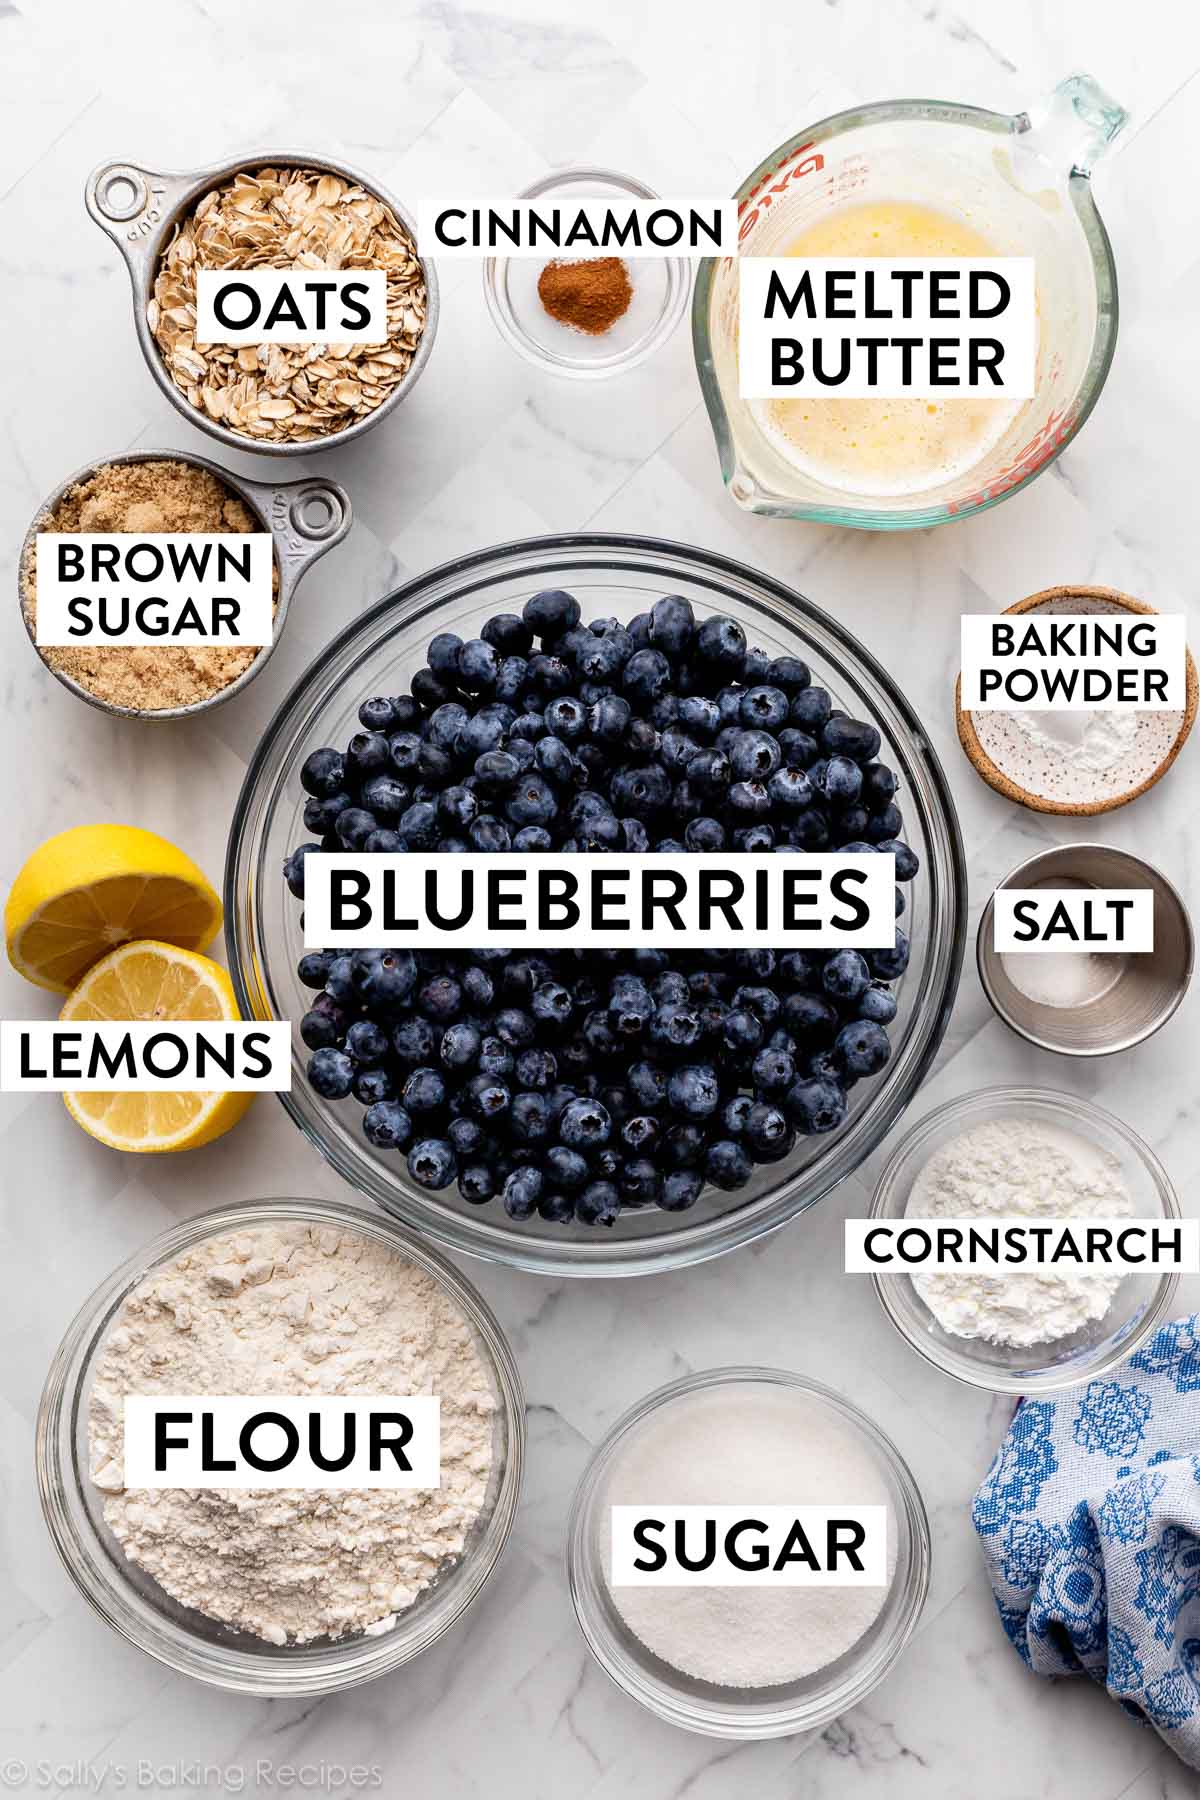 ingredients in separate bowls on marble counter including blueberries, sugar, flour, lemon, melted butter, oats, brown sugar, and more.